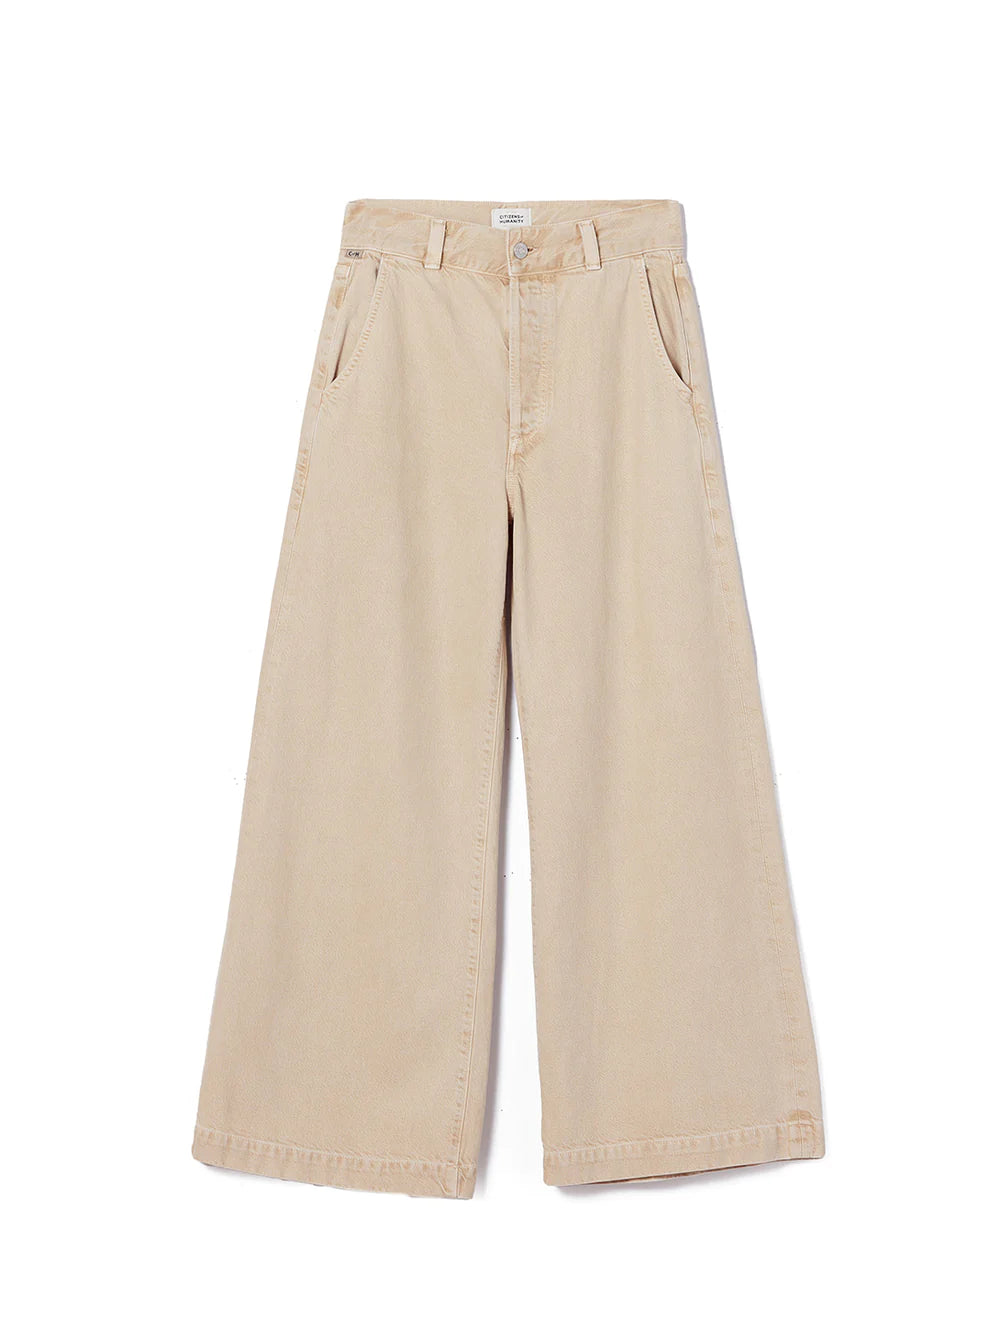 Taos Sand Beverly Trouser